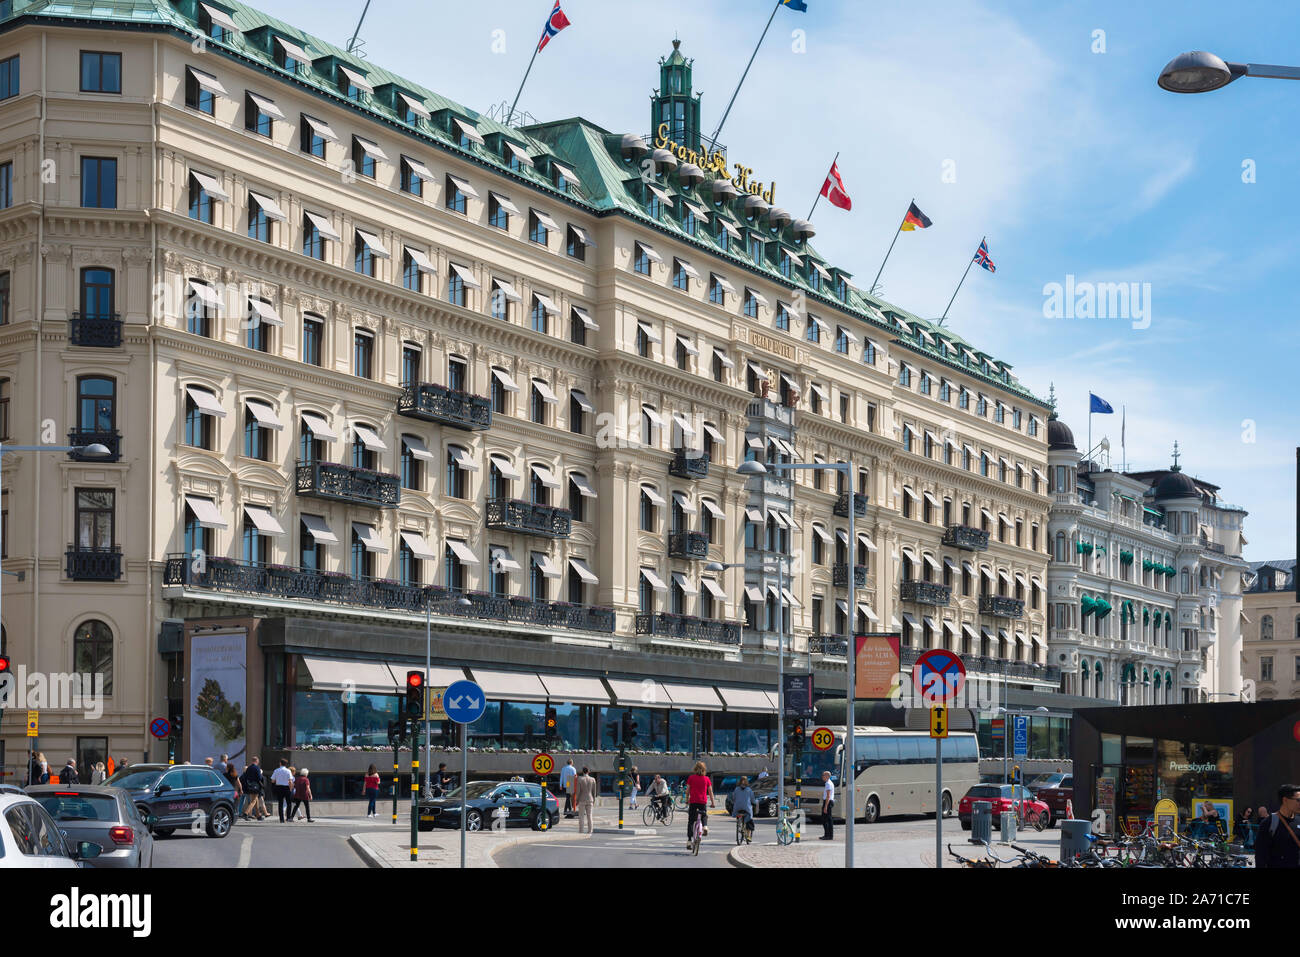 Stockholm Grand Hotel 2019, view of the Grand Hotel, a 5 star hotel built in 1874 sited on Blasieholmen waterfront in central Stockholm, Sweden. Stock Photo